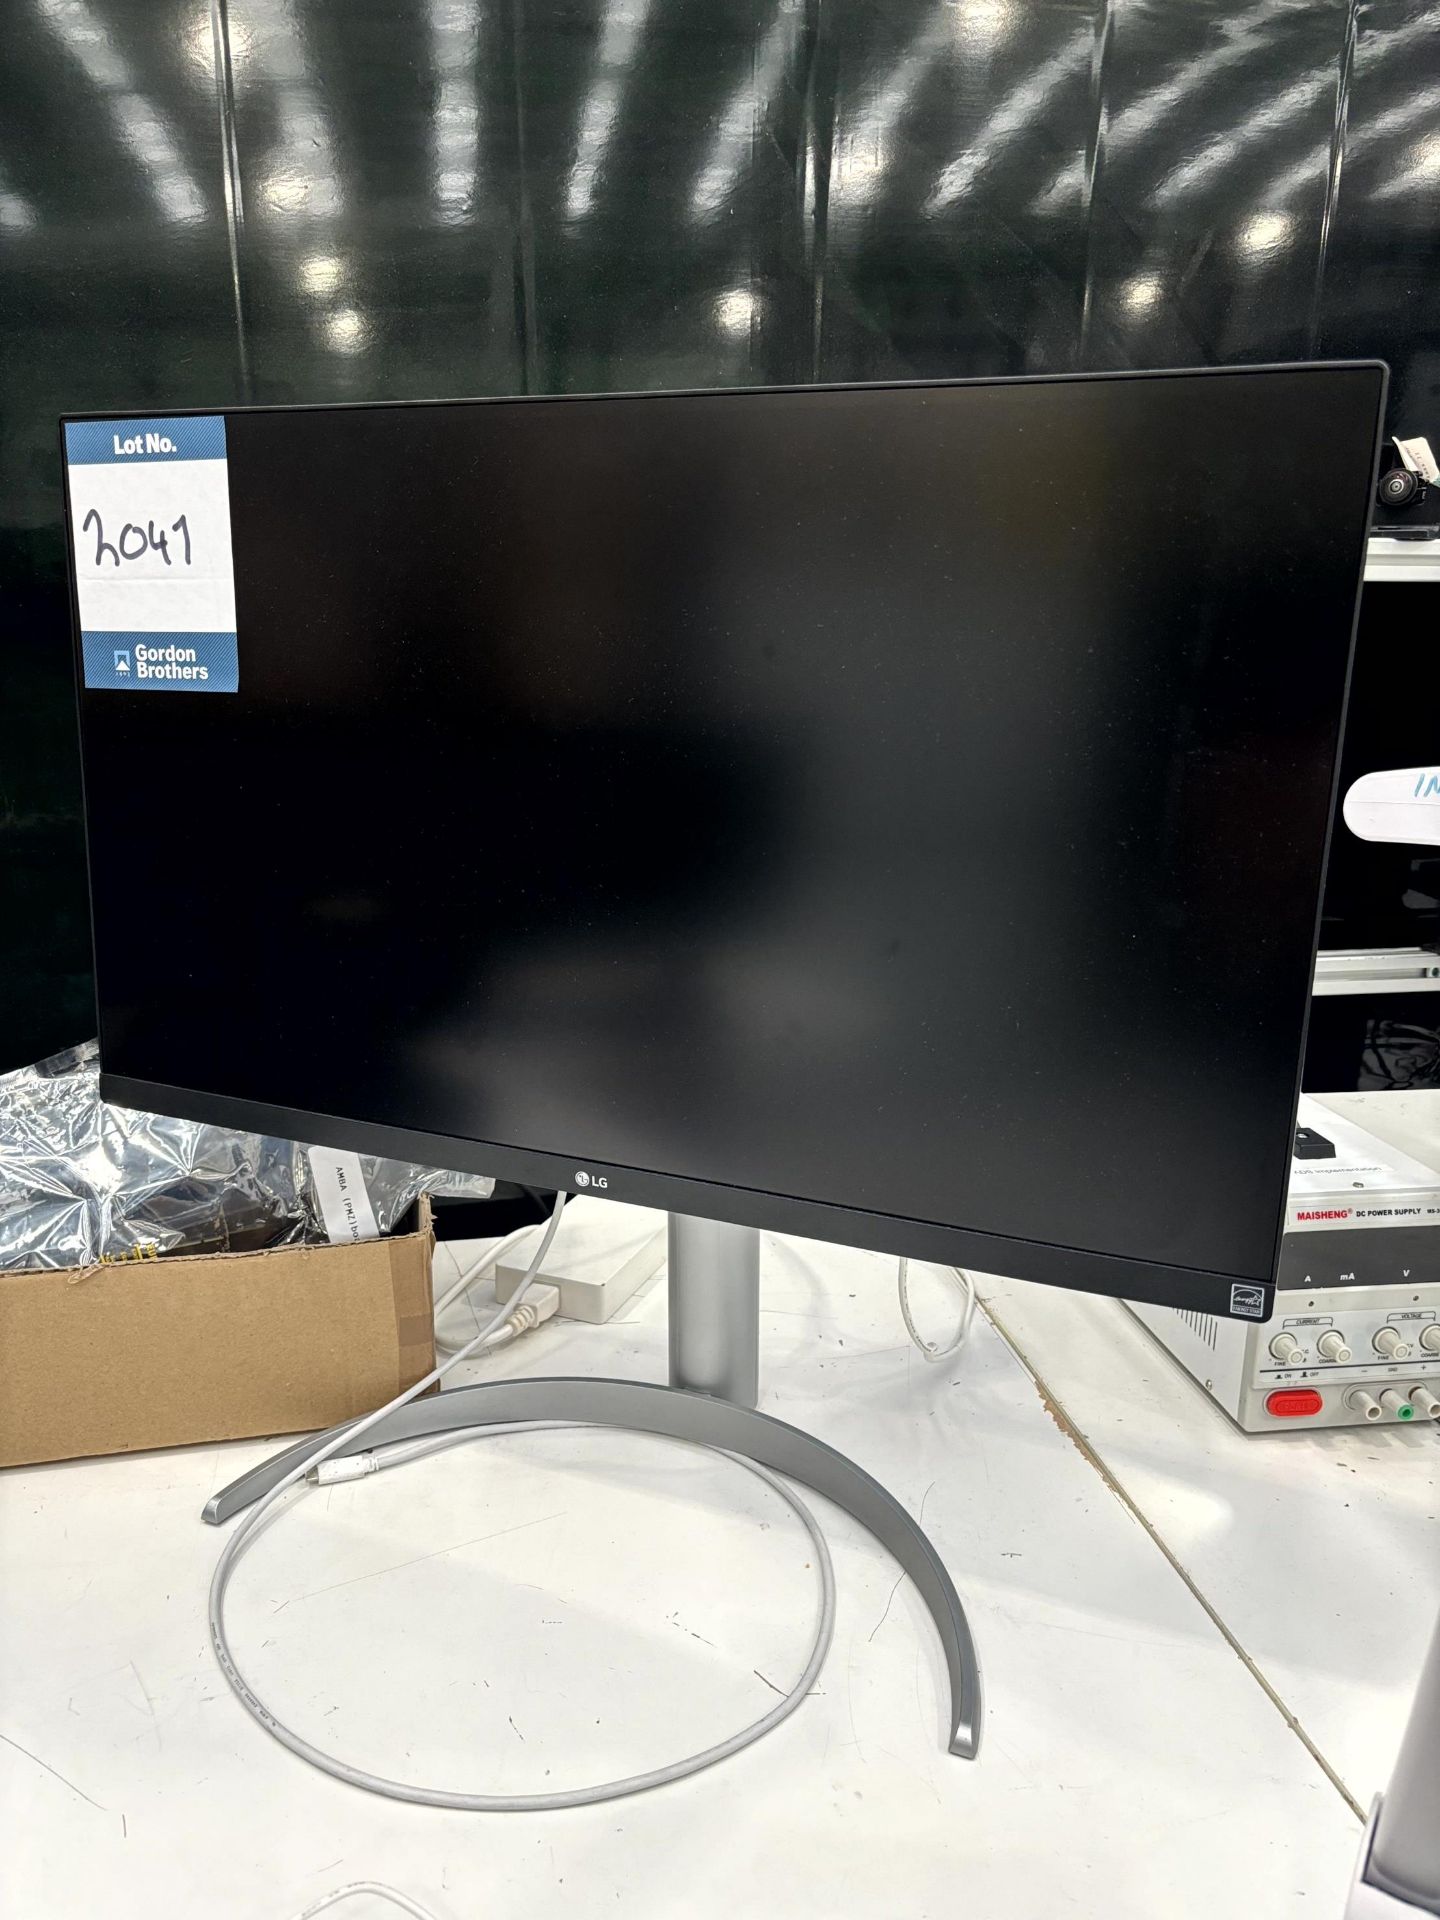 LG, 27UP850 27" flatscreen monitor with 240v power supply and height adjustable stand